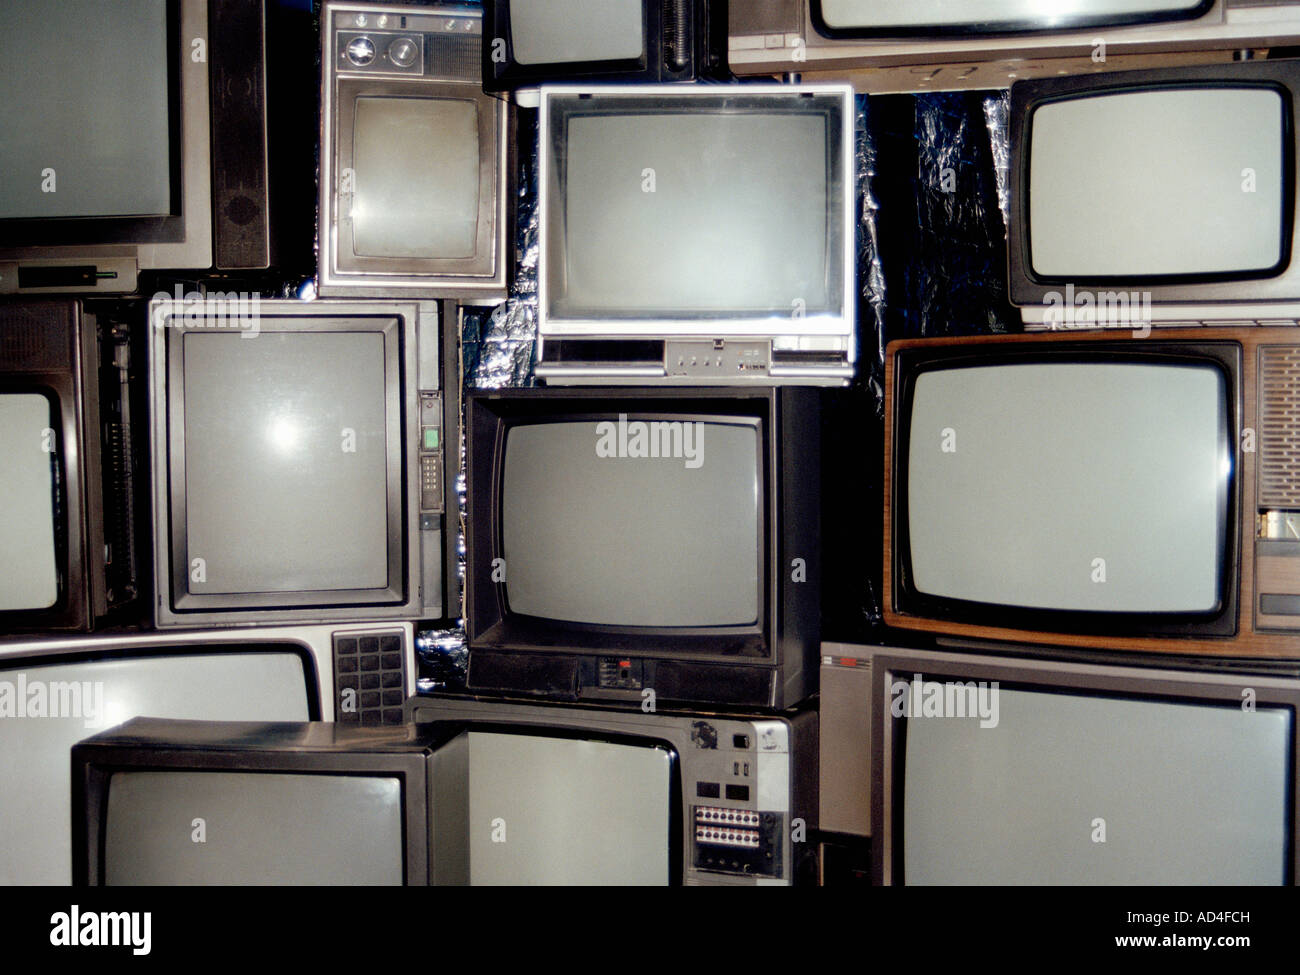 A collection of television sets Stock Photo